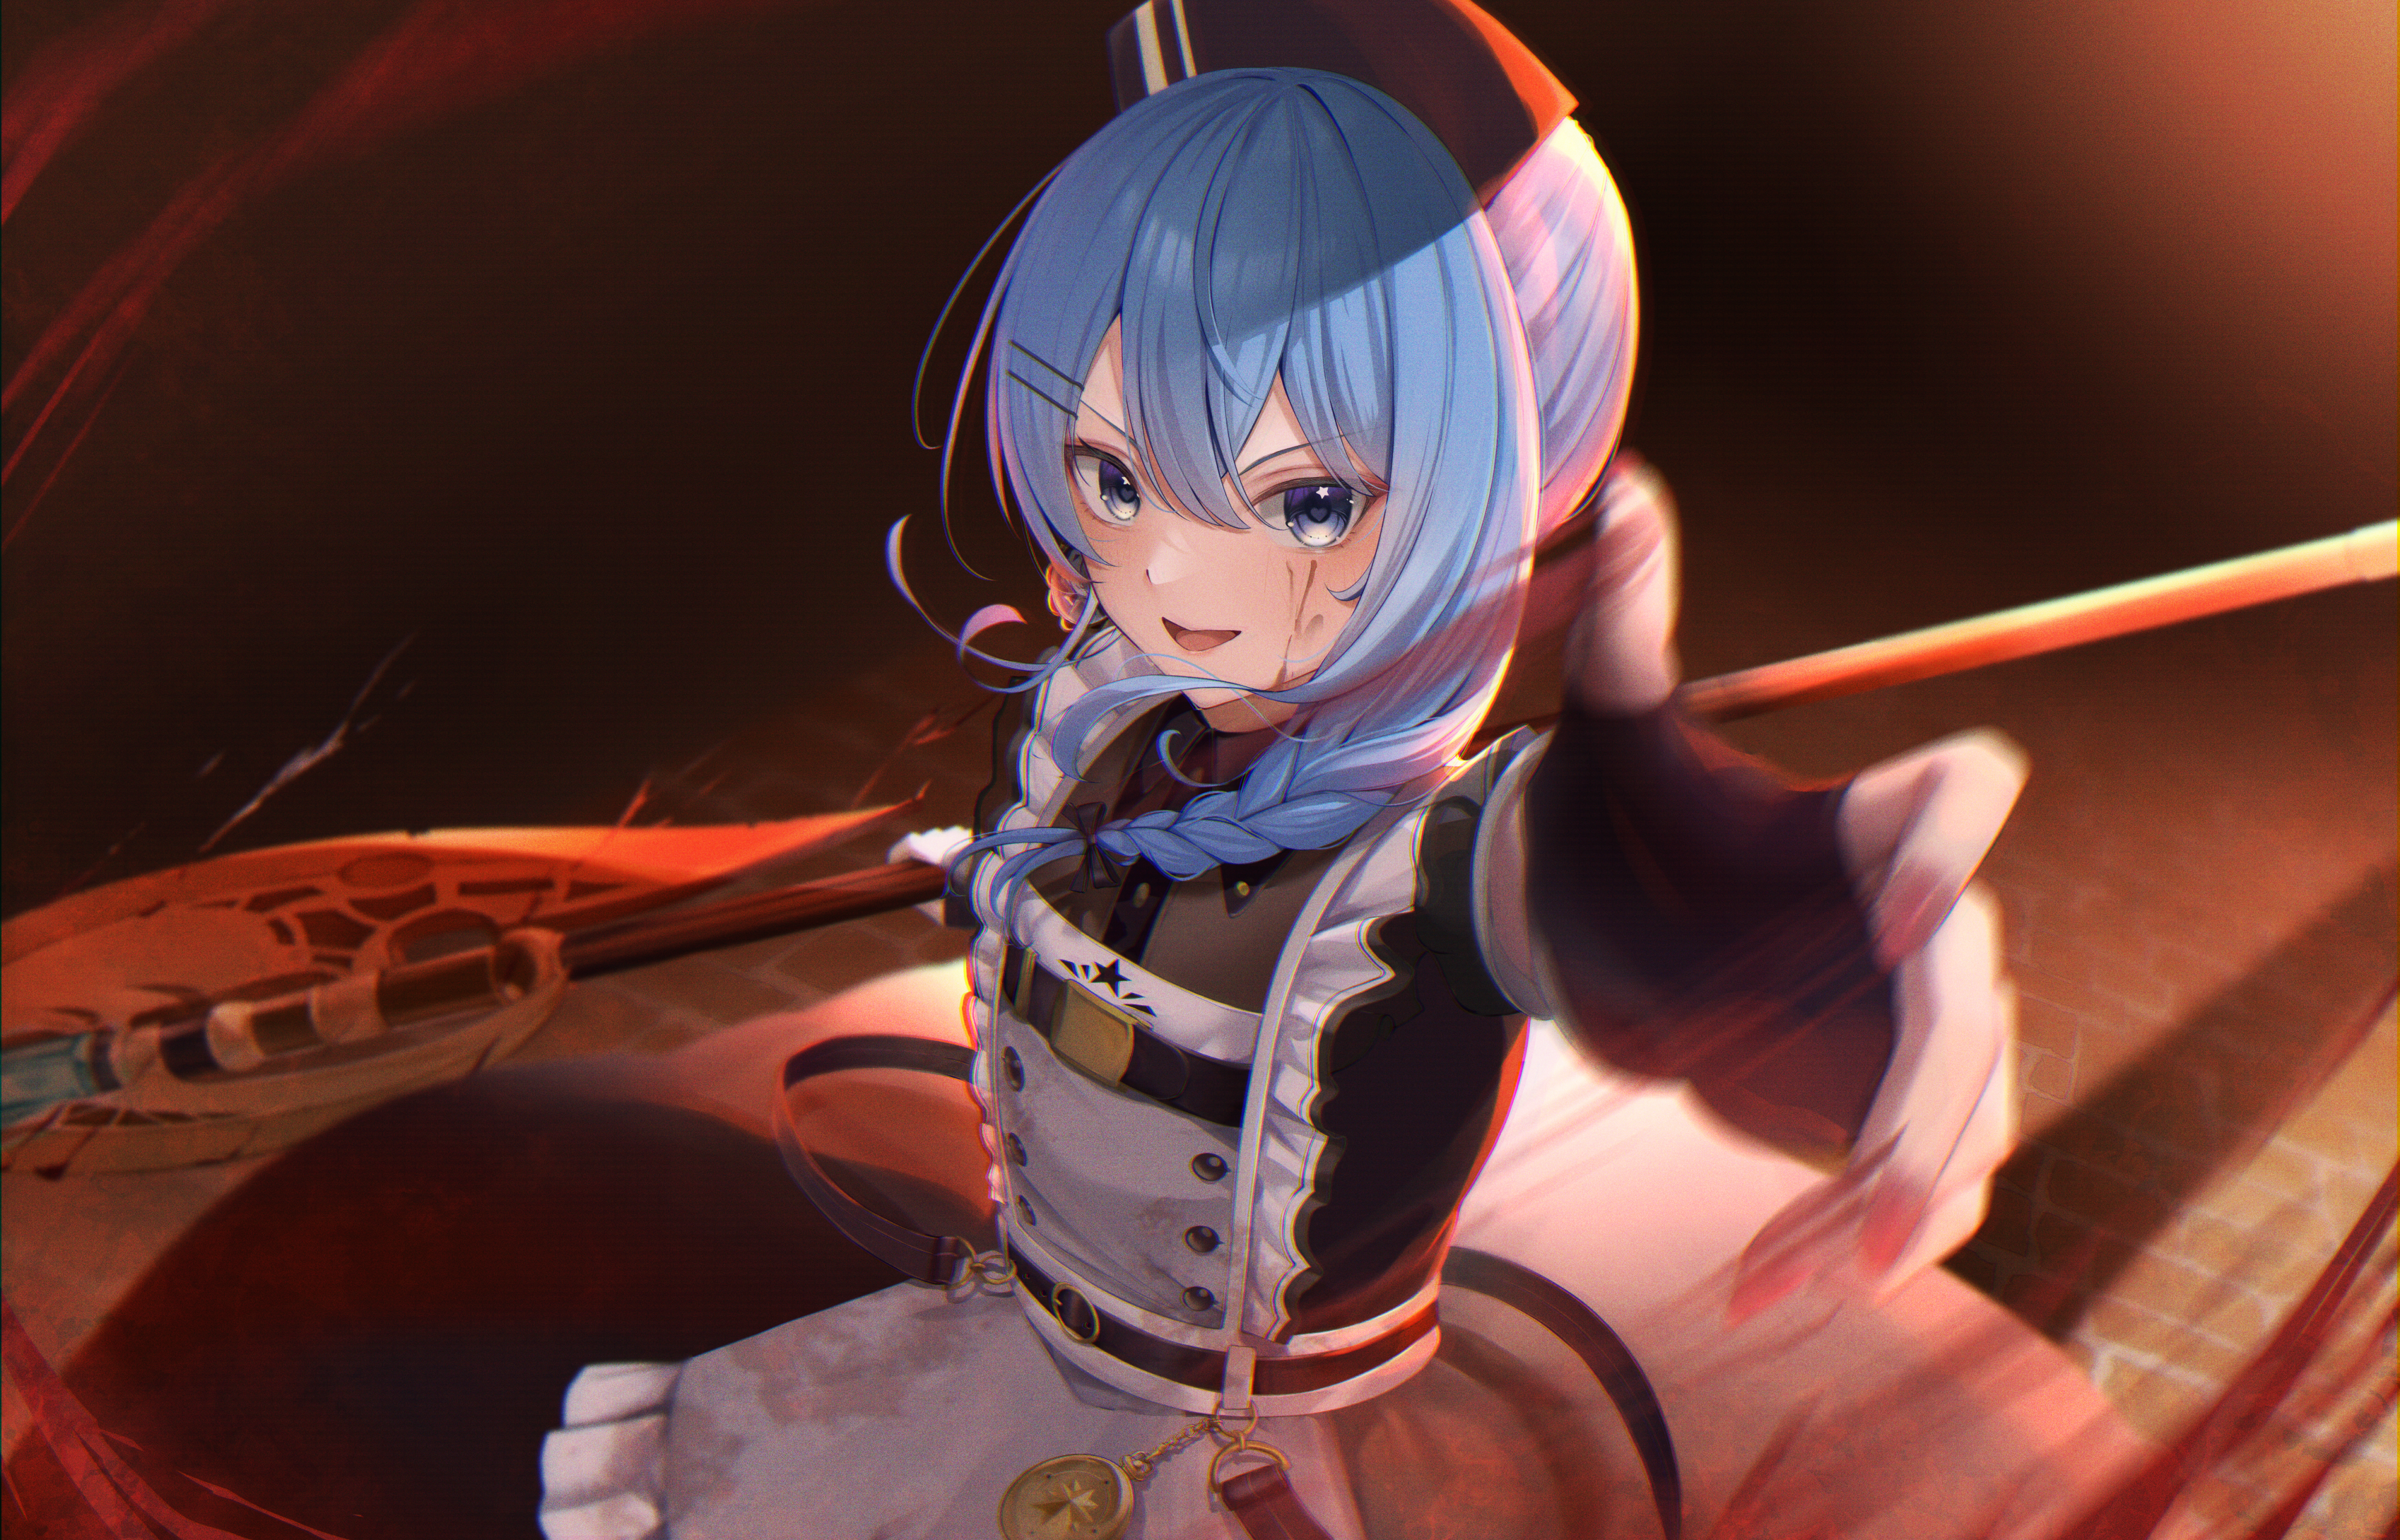 Anime 3984x2557 anime anime girls artwork blue hair maid maid outfit blue eyes looking at viewer simple background braids arms reaching smiling minimalism Hoshimachi Suisei Hololive Virtual Youtuber